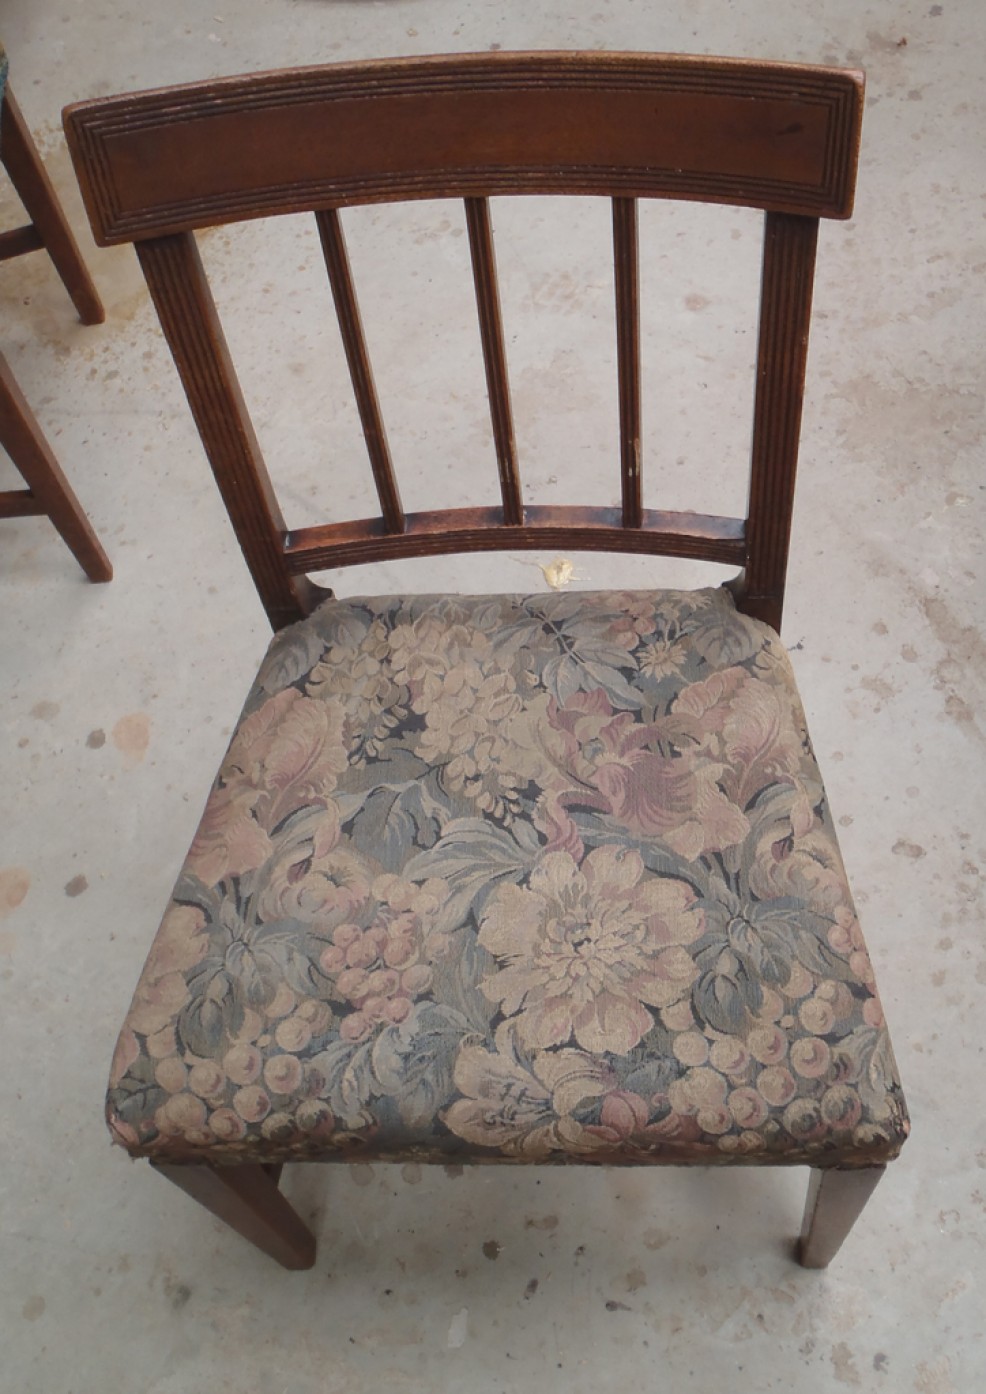 Dining chair reupholstered